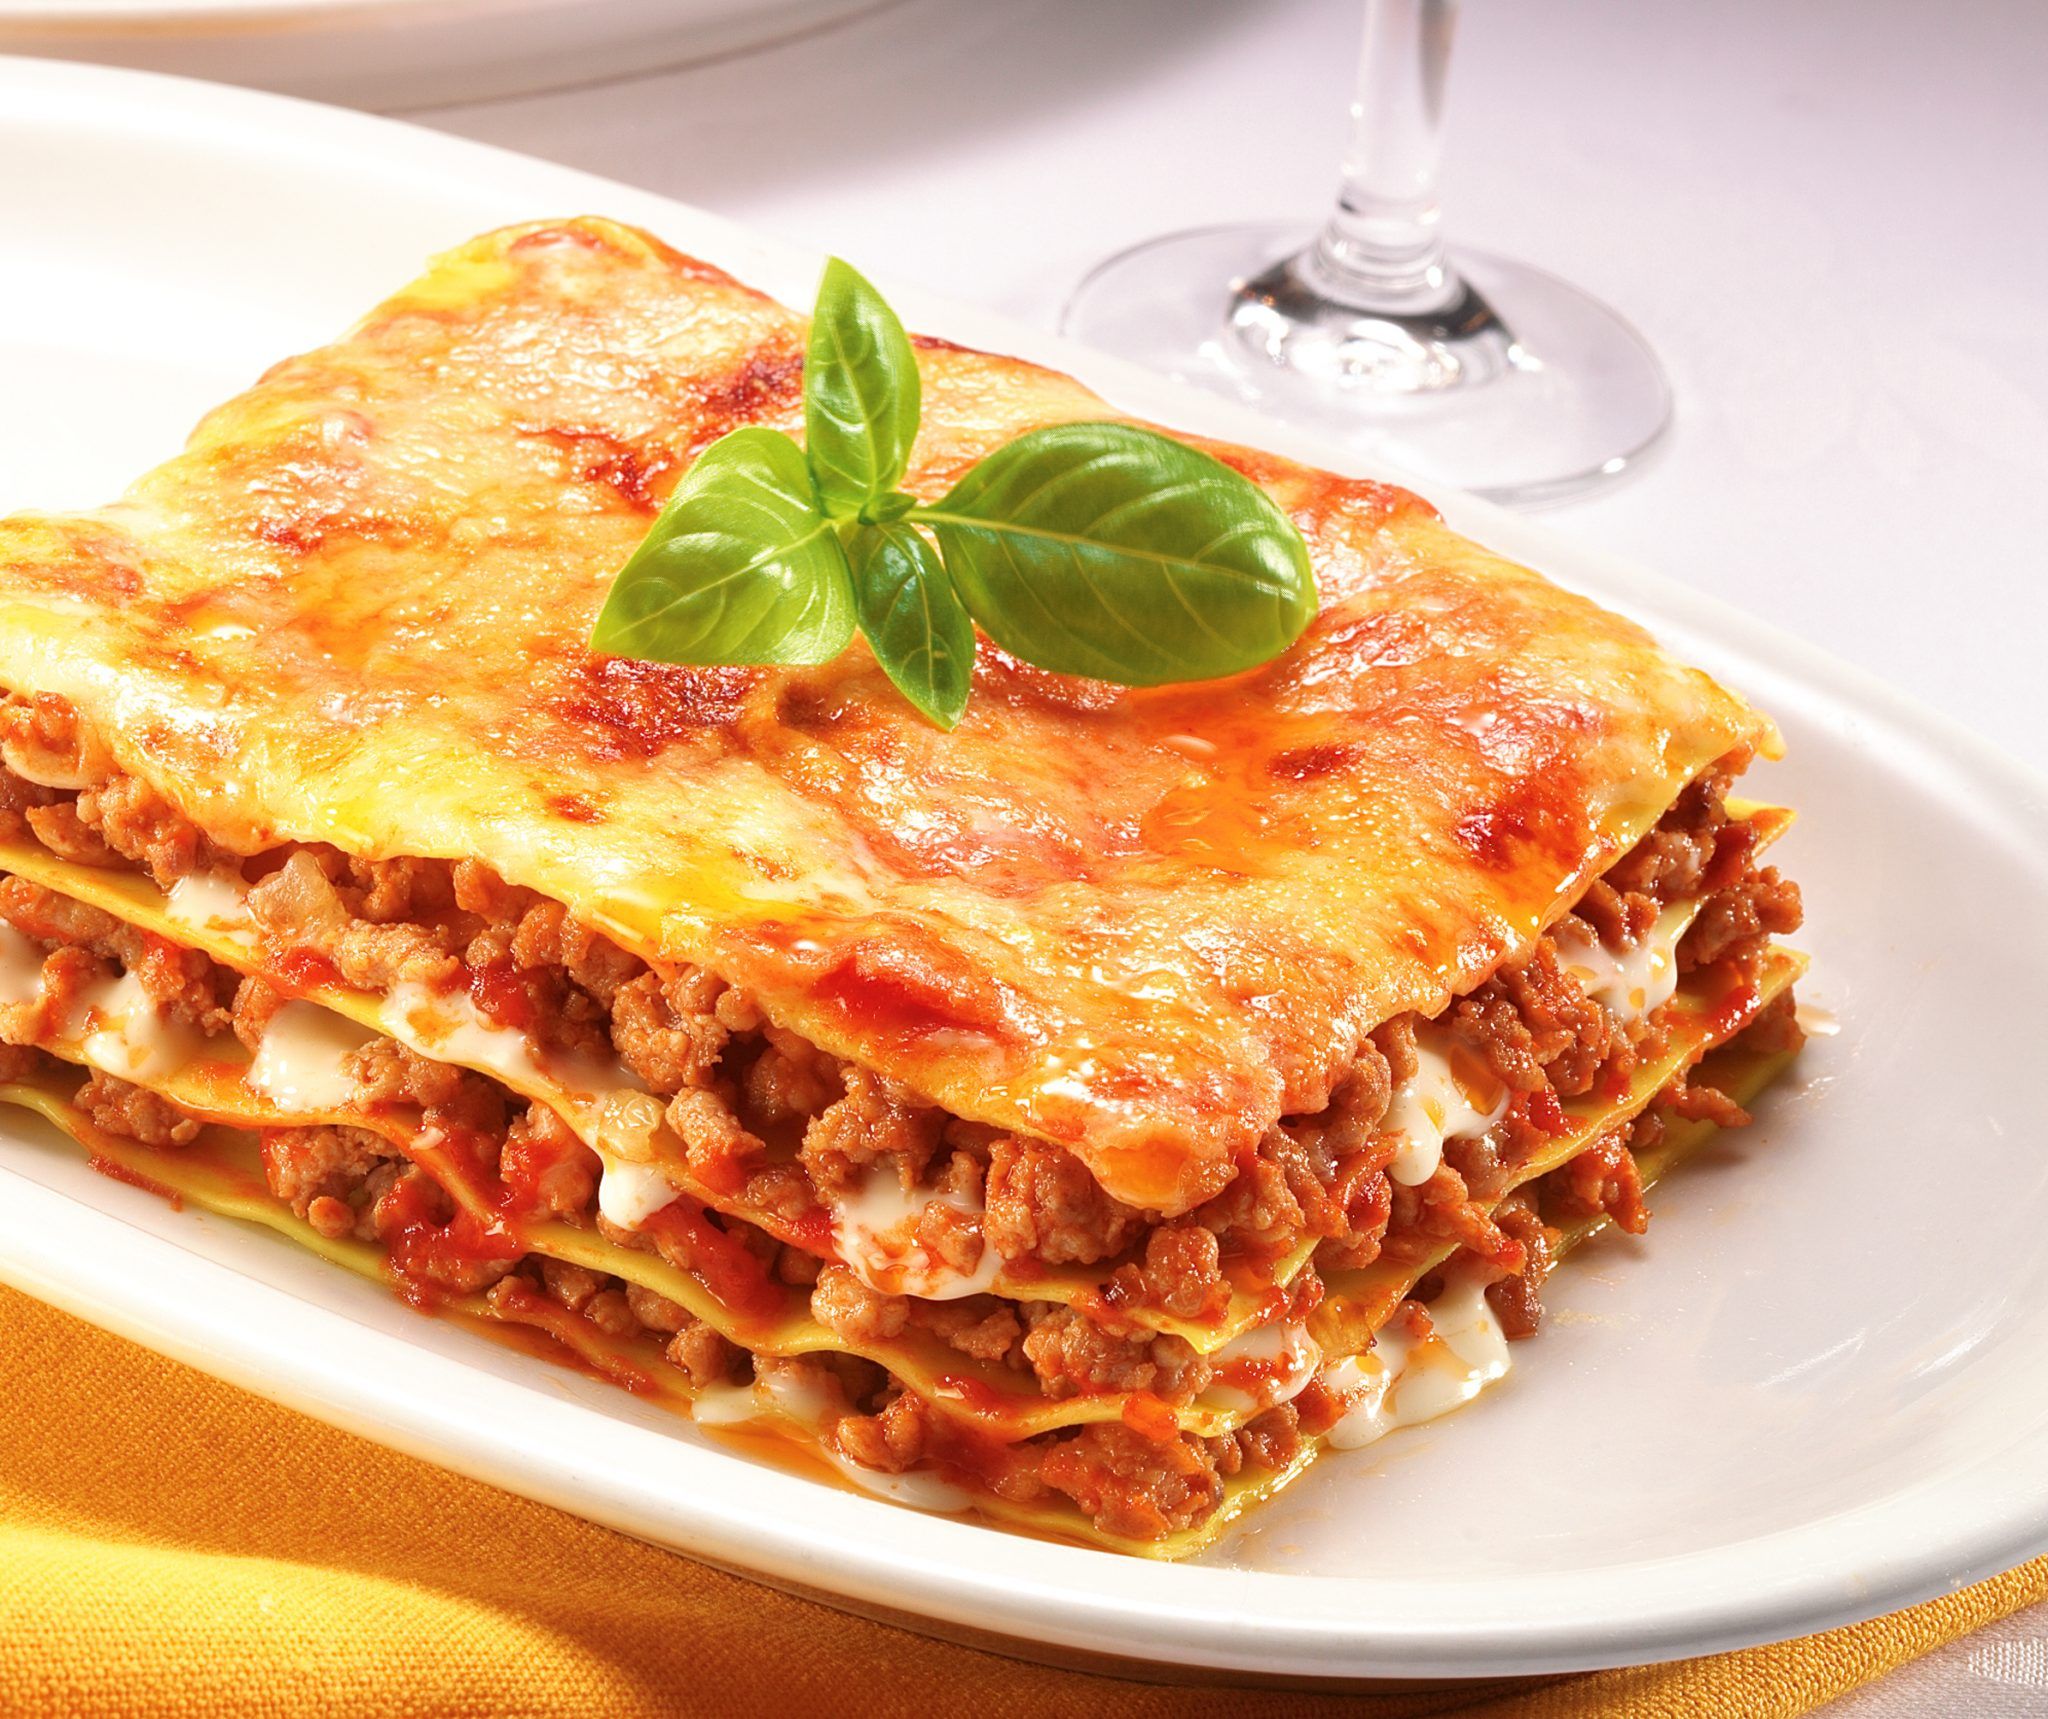 Lasagne was taken to be tested (miomea / iStock)